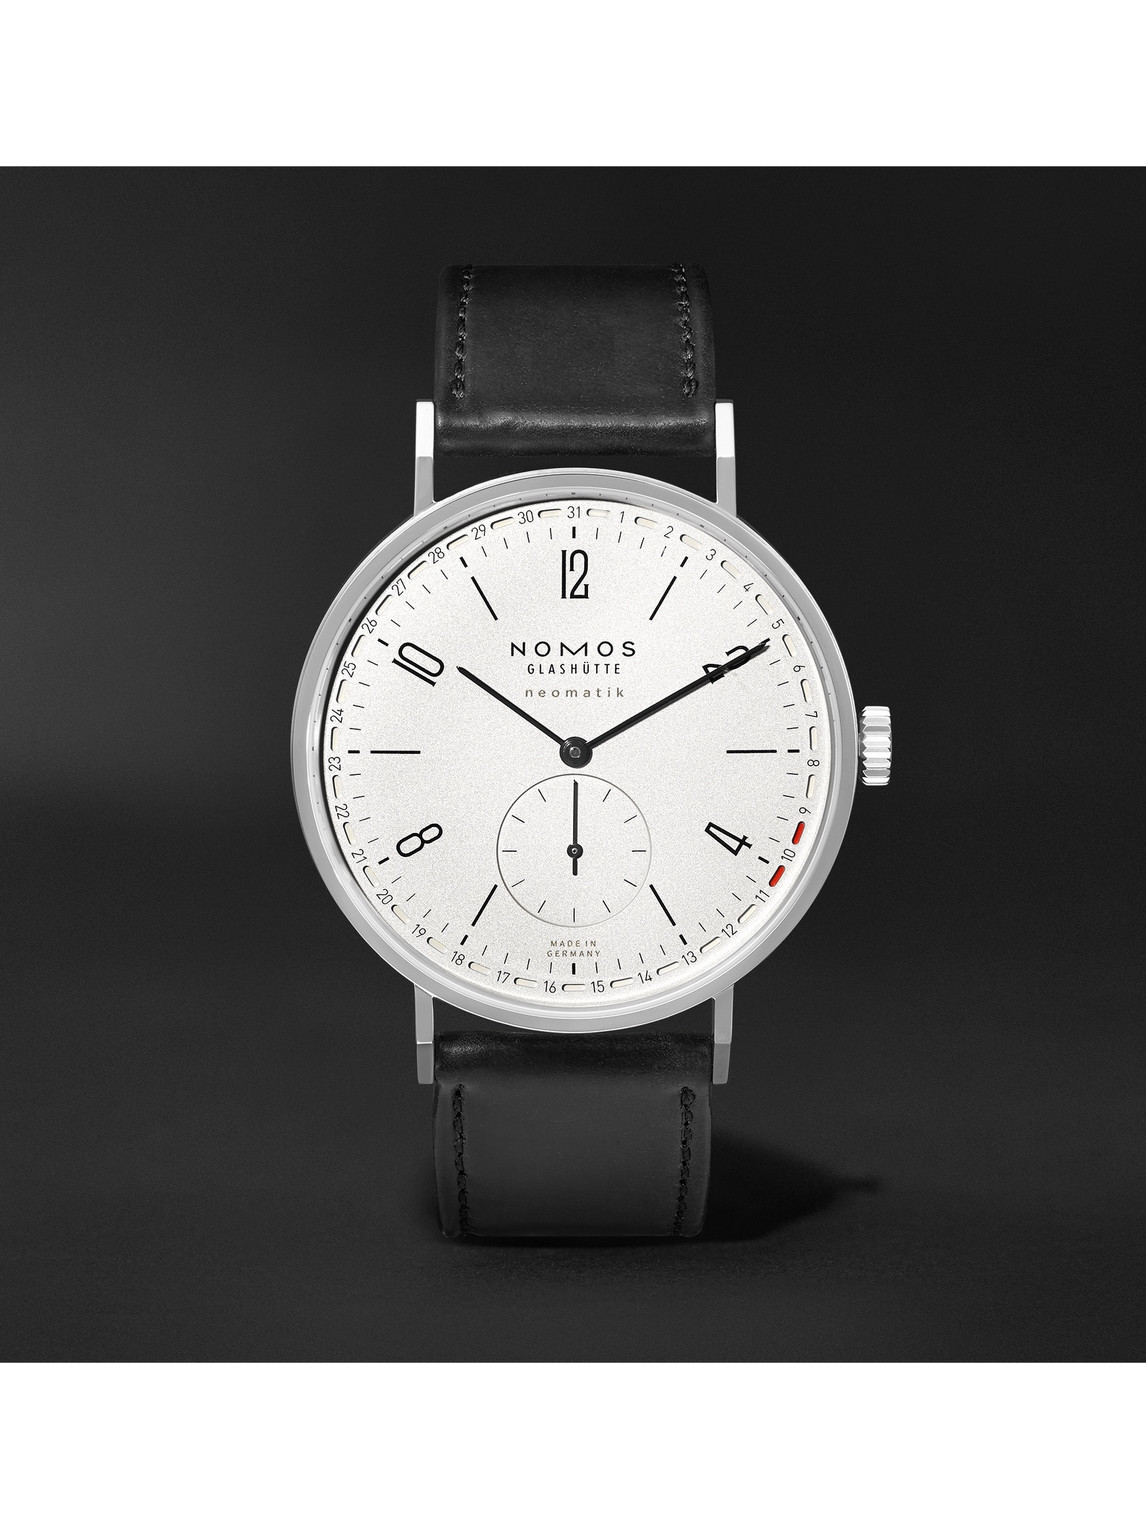 Tangente Neomatik Automatic 41mm Stainless Steel and Leather Watch, Ref. No. 180